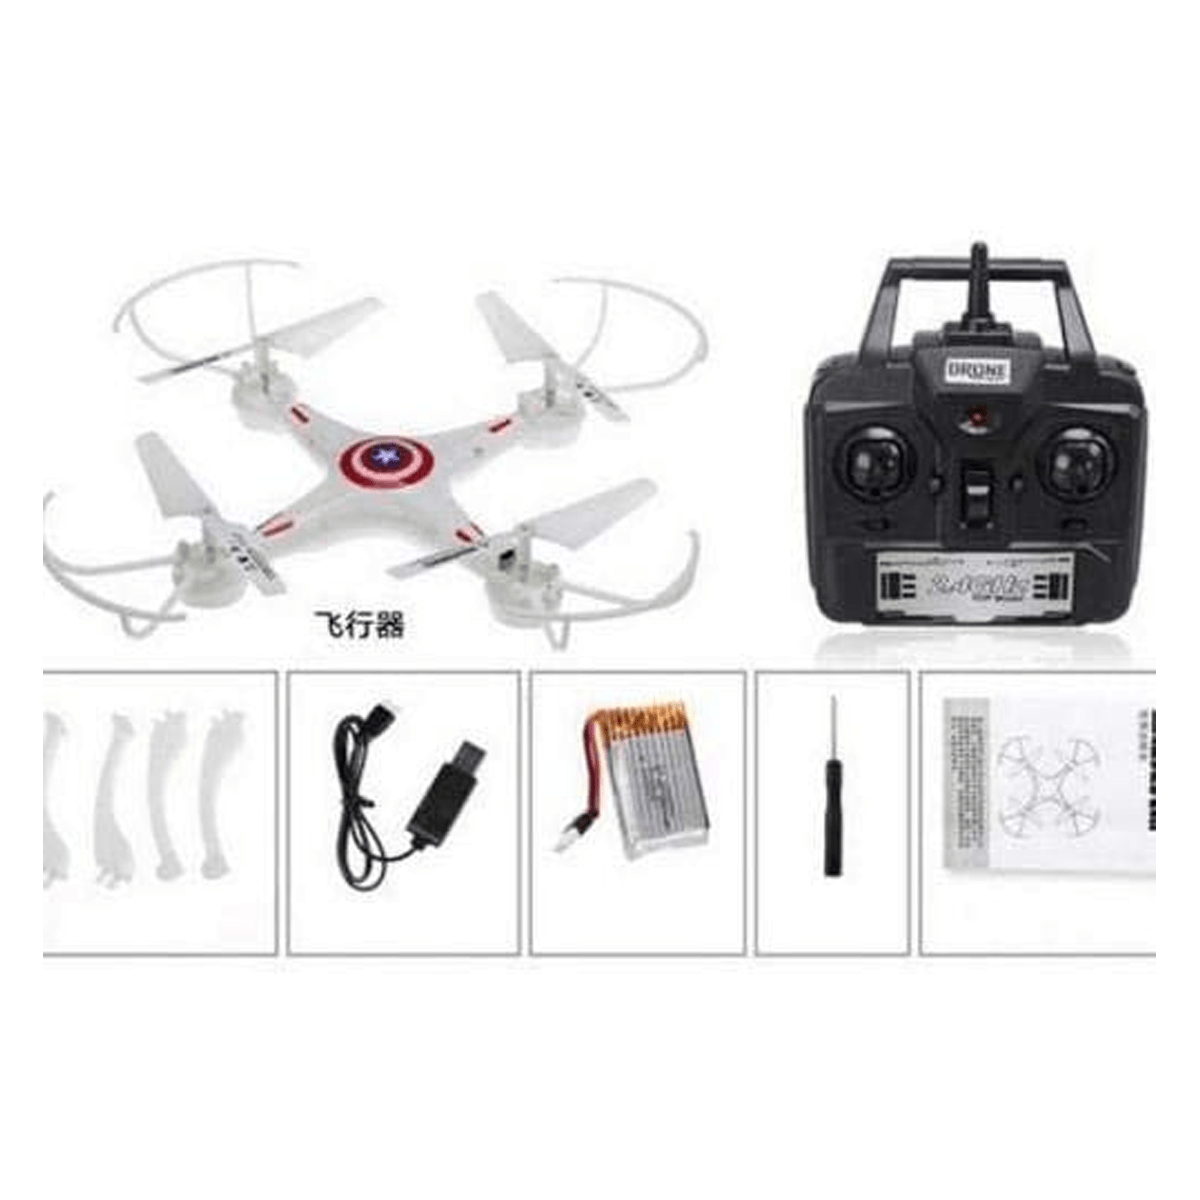 mt290 6 axis gyro quad copter Mini drone white with remote and its accessories